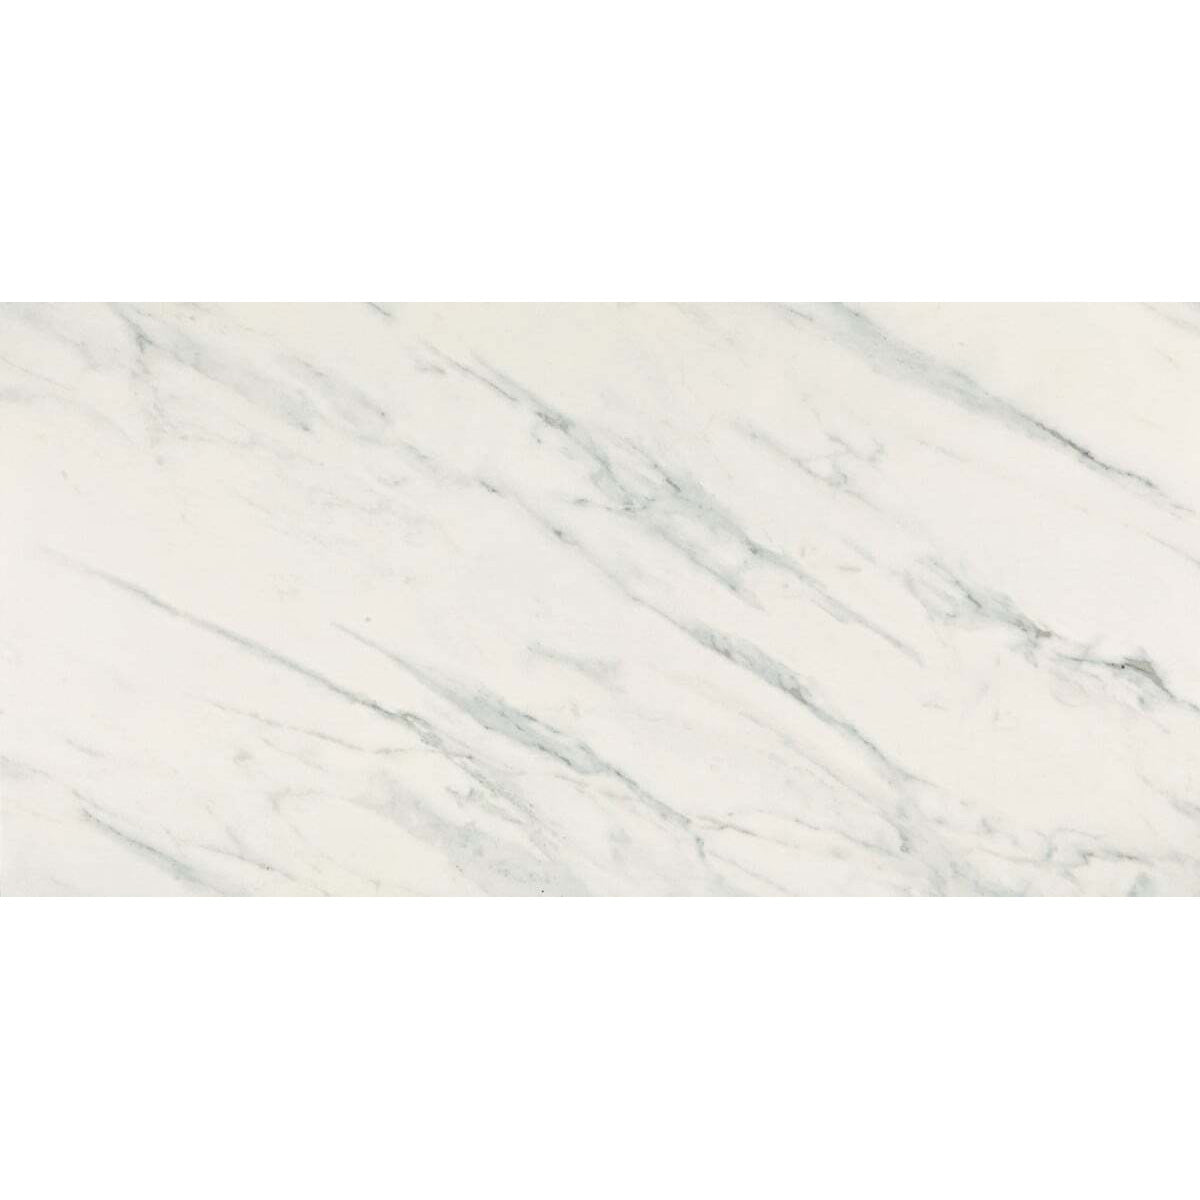 American Olean - Ideology Porcelain Tile 12 in. x 24 in. - Carrara White Polished